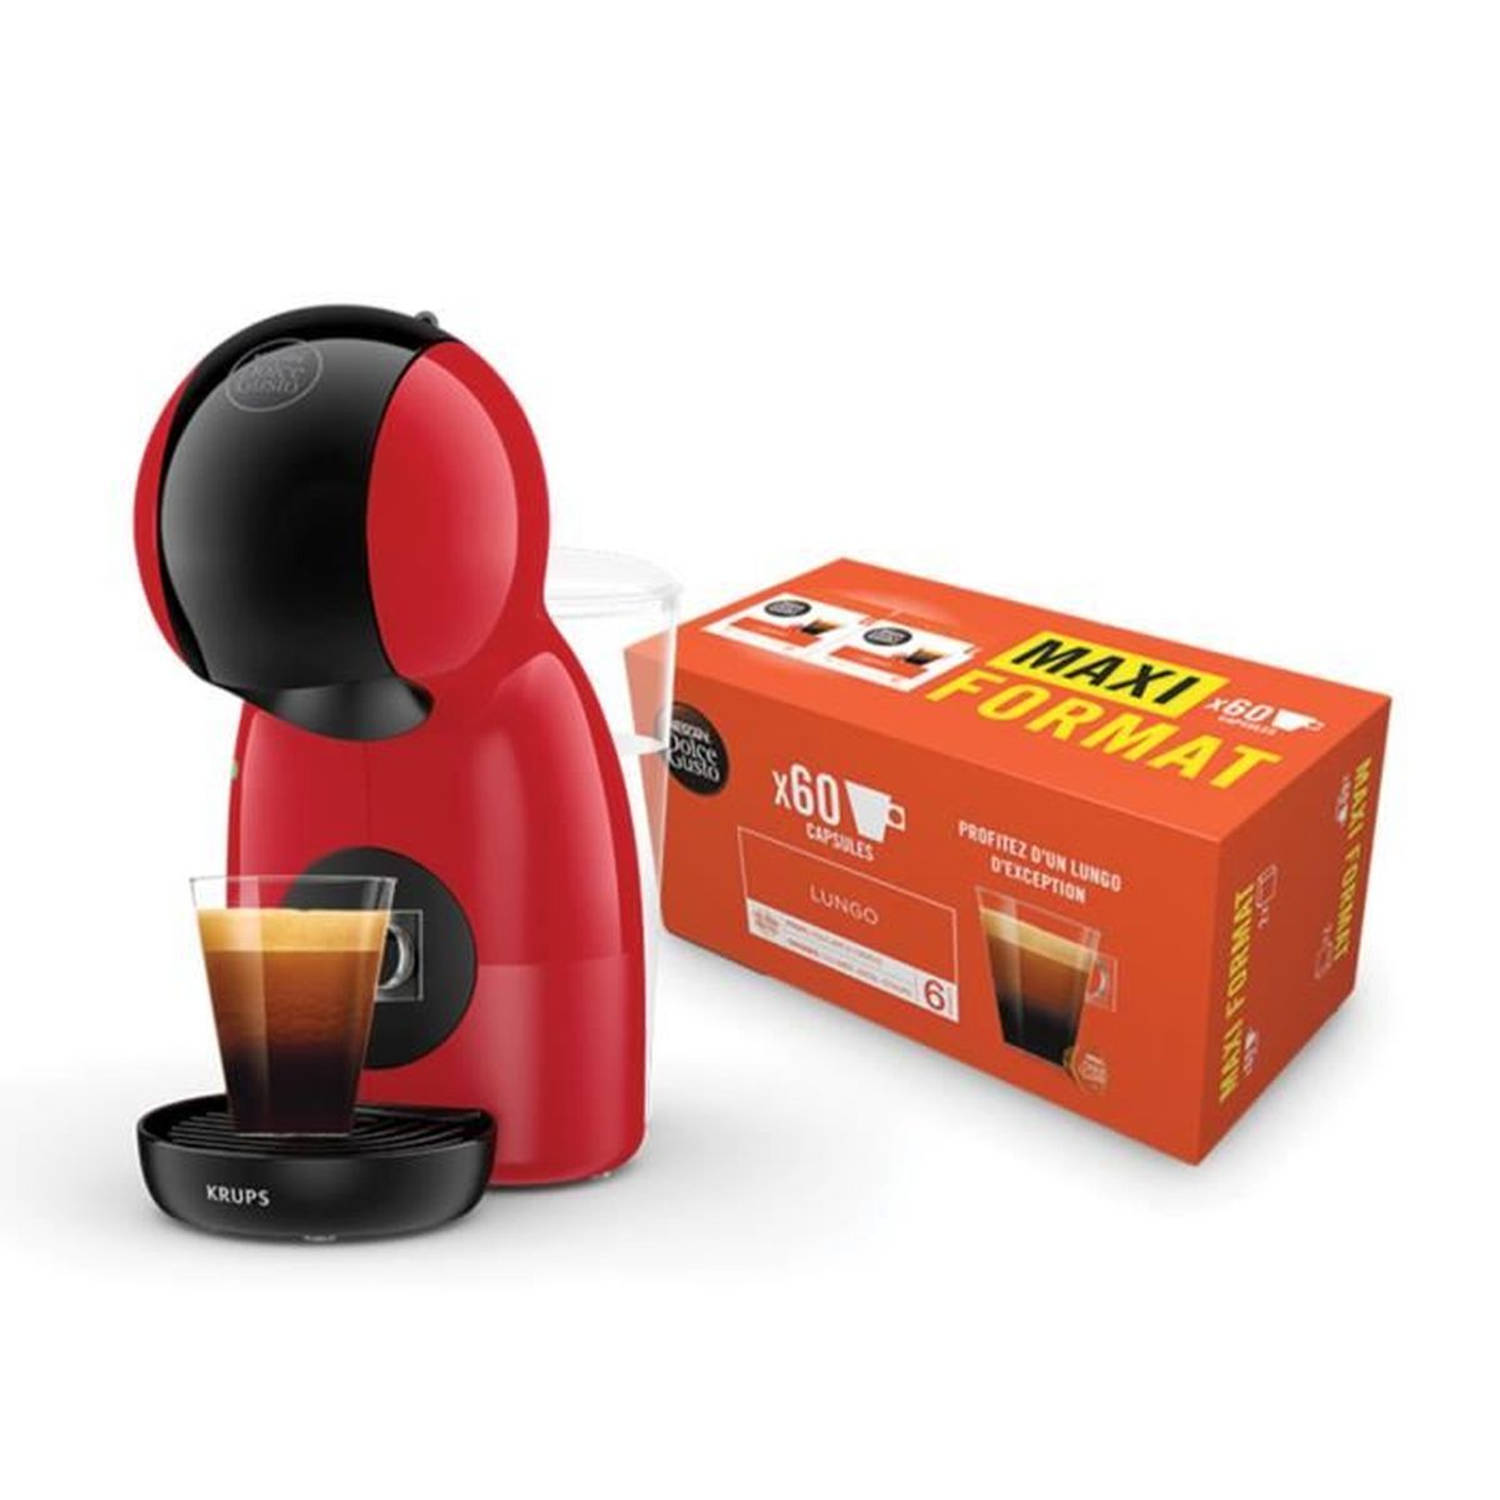 KRUPS Nescaf?? Dolce Gusto Koffiezetapparaat 60 lungo koffiecapsules, 15 repen, Piccolo XS YY5129FD